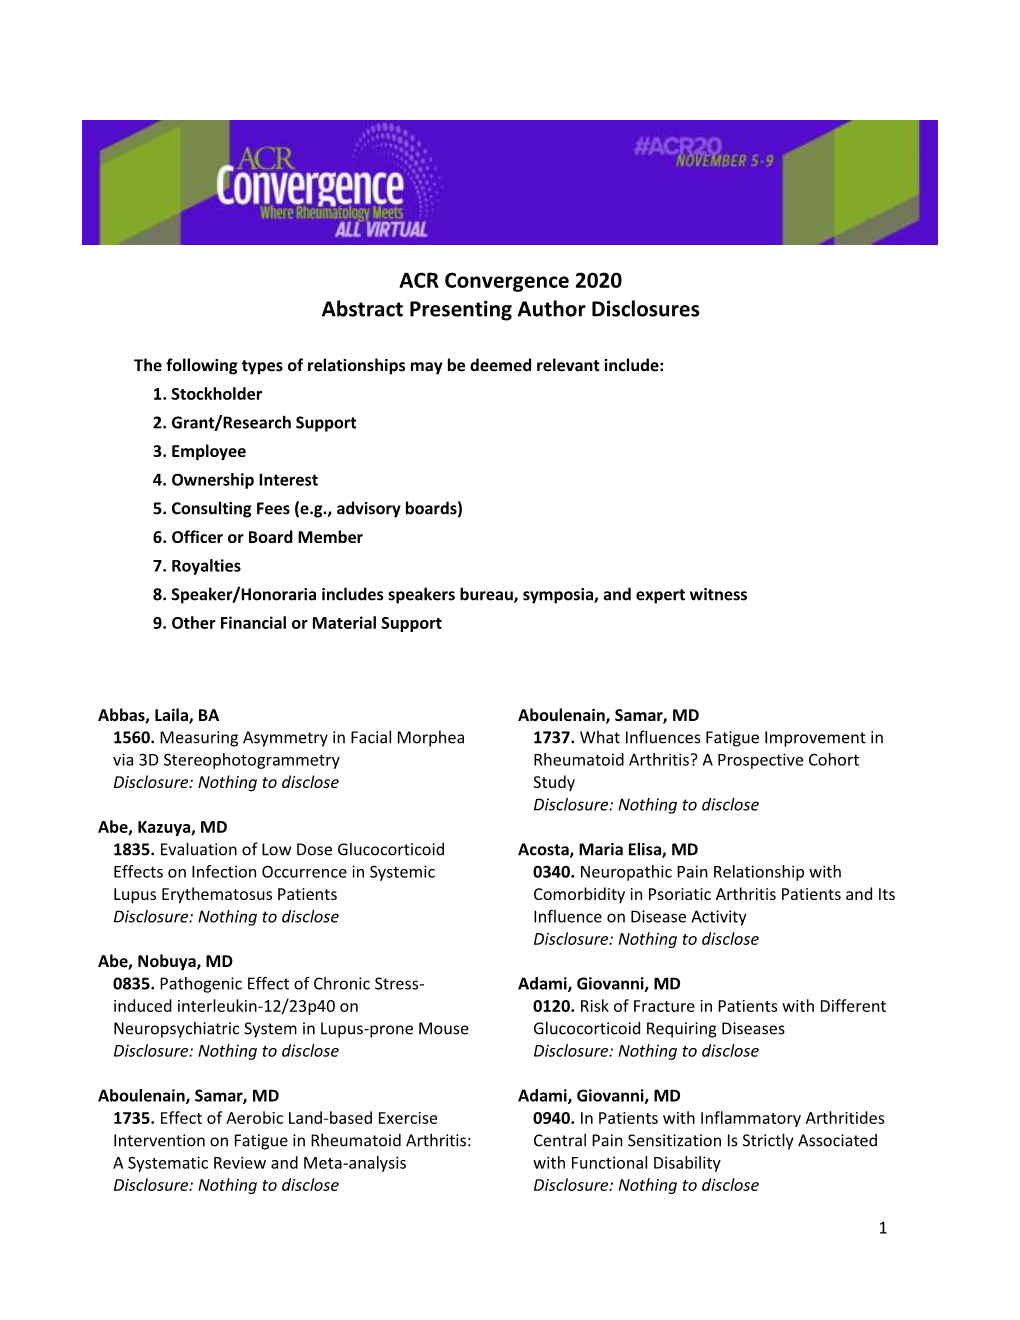 ACR Convergence 2020 Abstract Presenting Author Disclosures